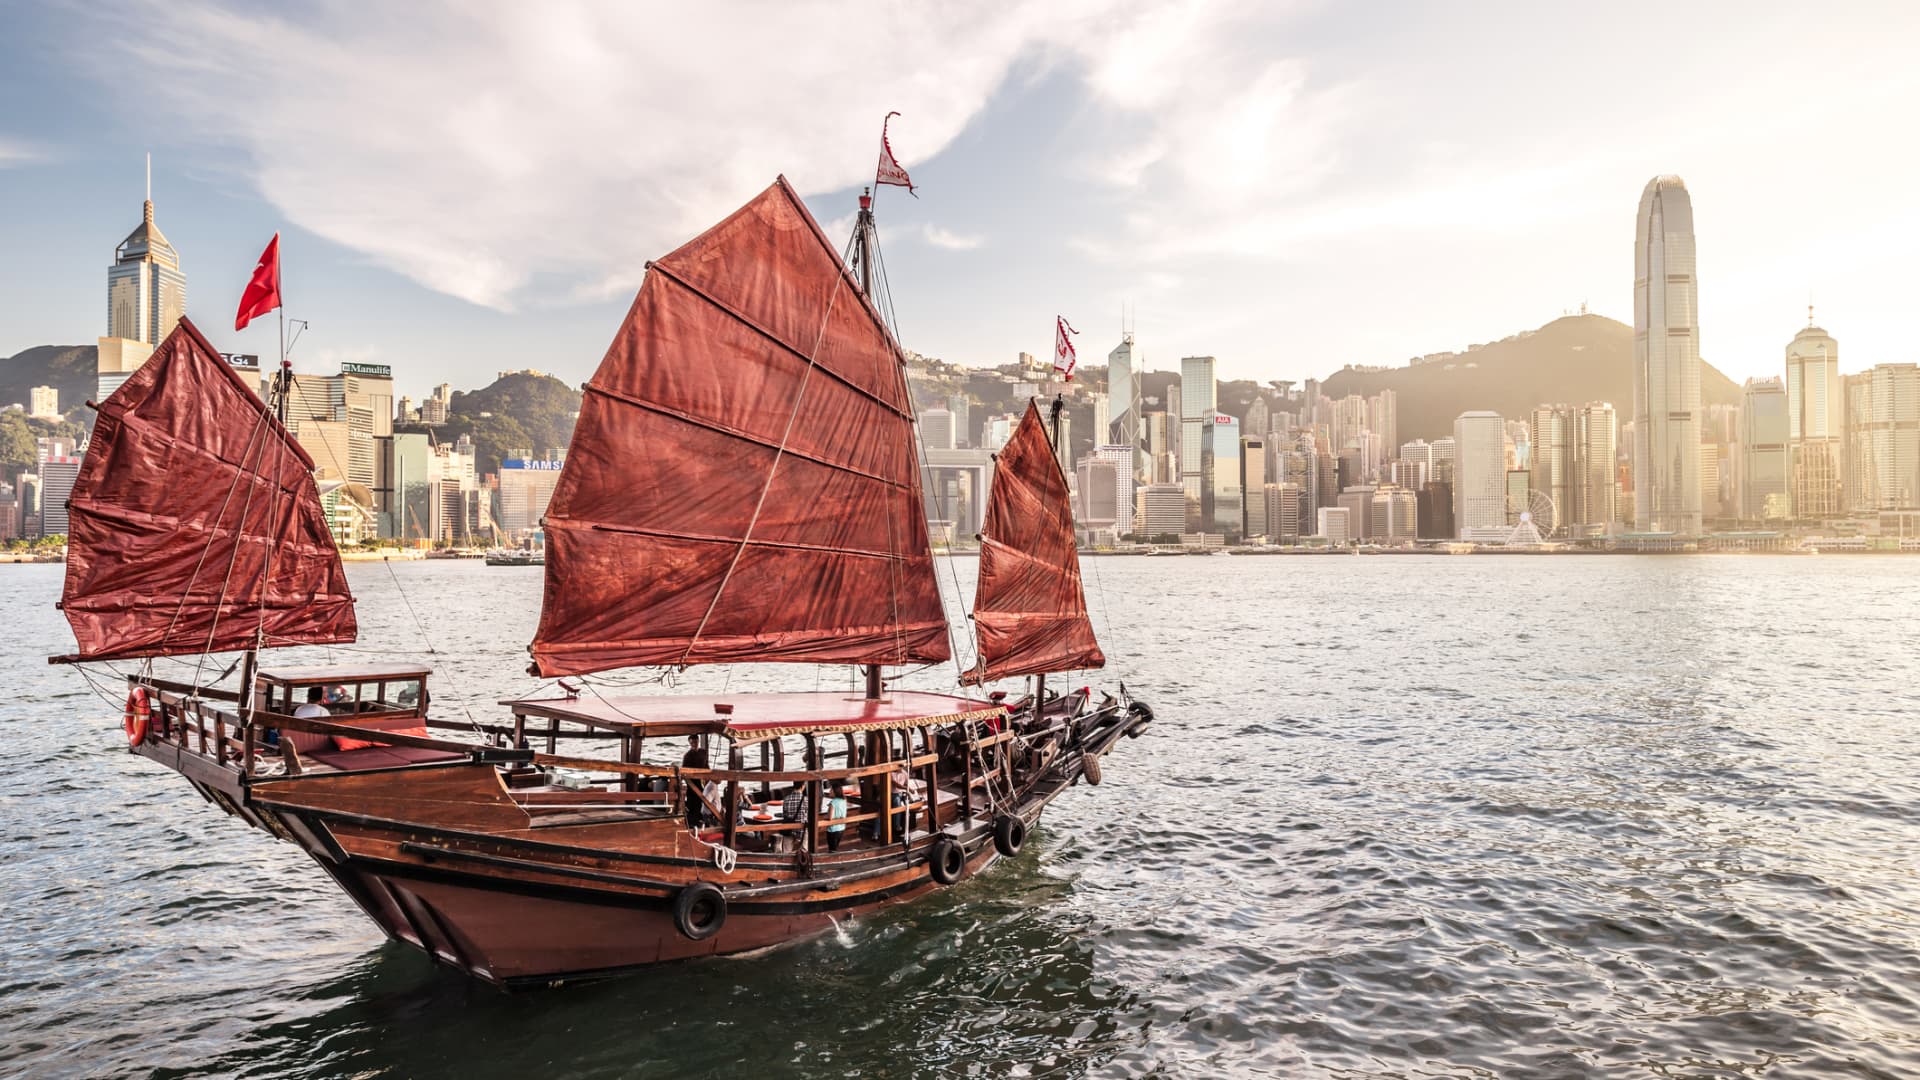 Hong Kong is giving away 500,000 flights this year—here’s what to know